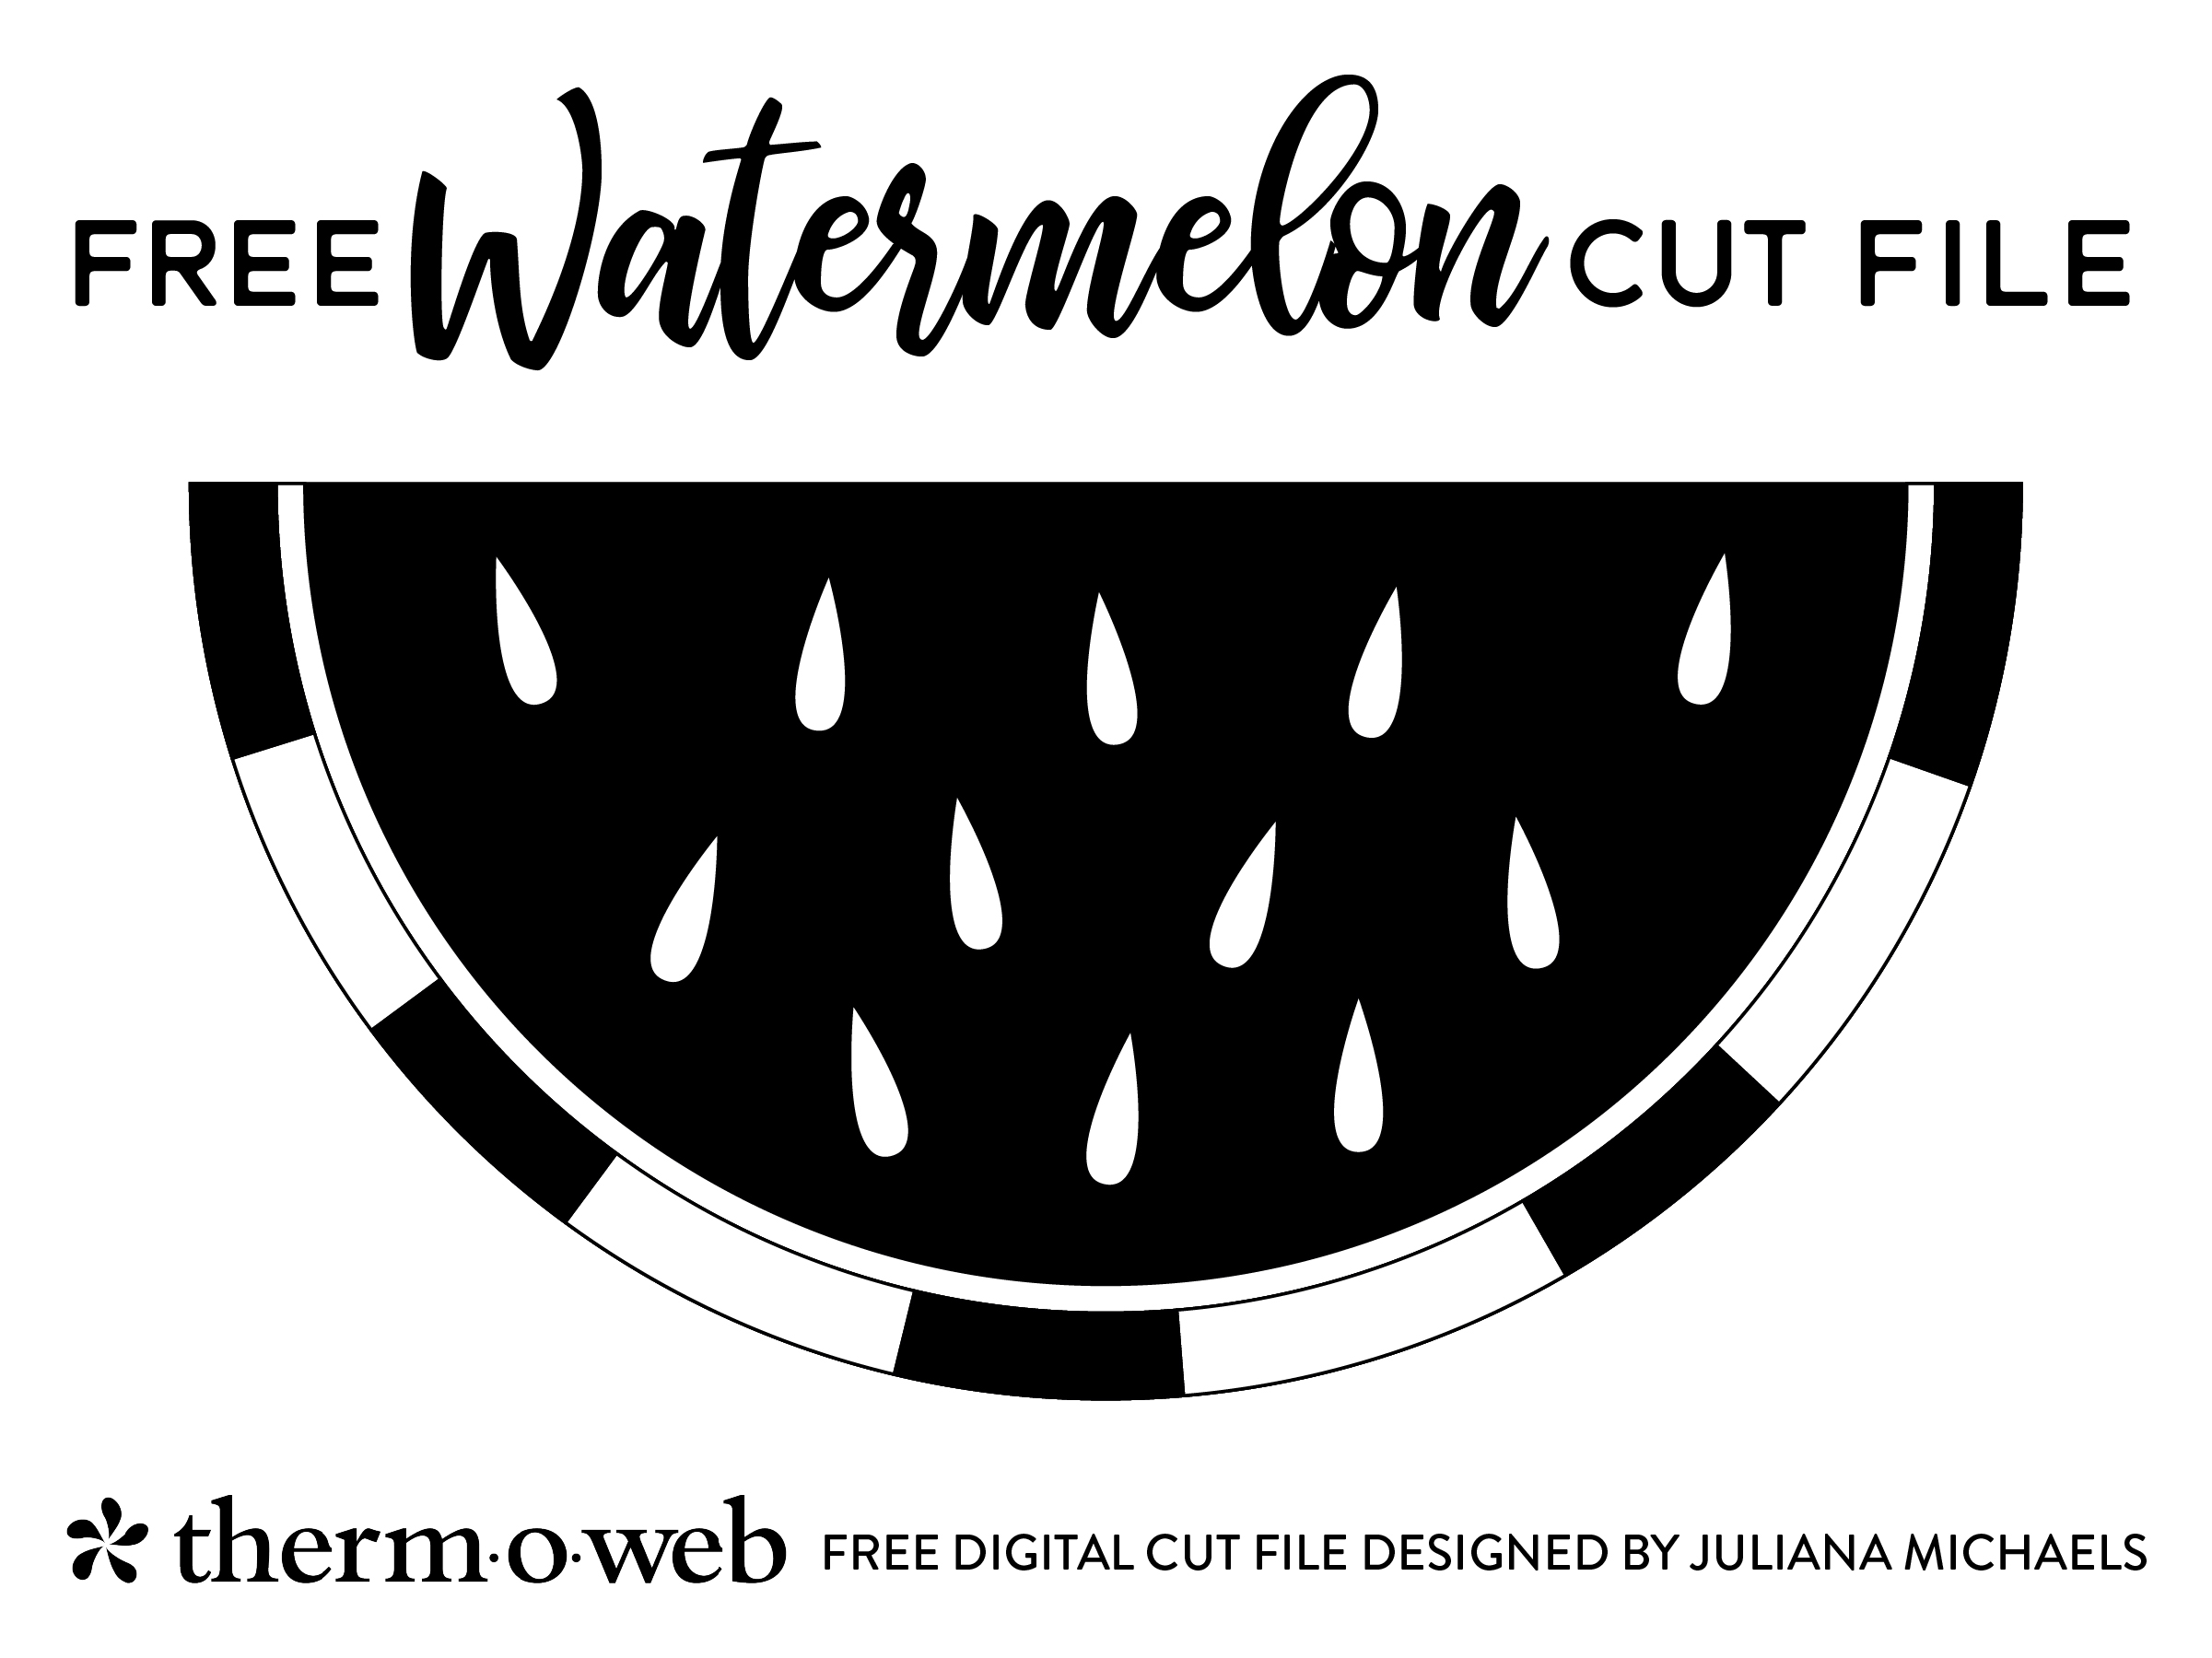 Free Watermelon Cut File by Juliana Michaels for Therm O Web